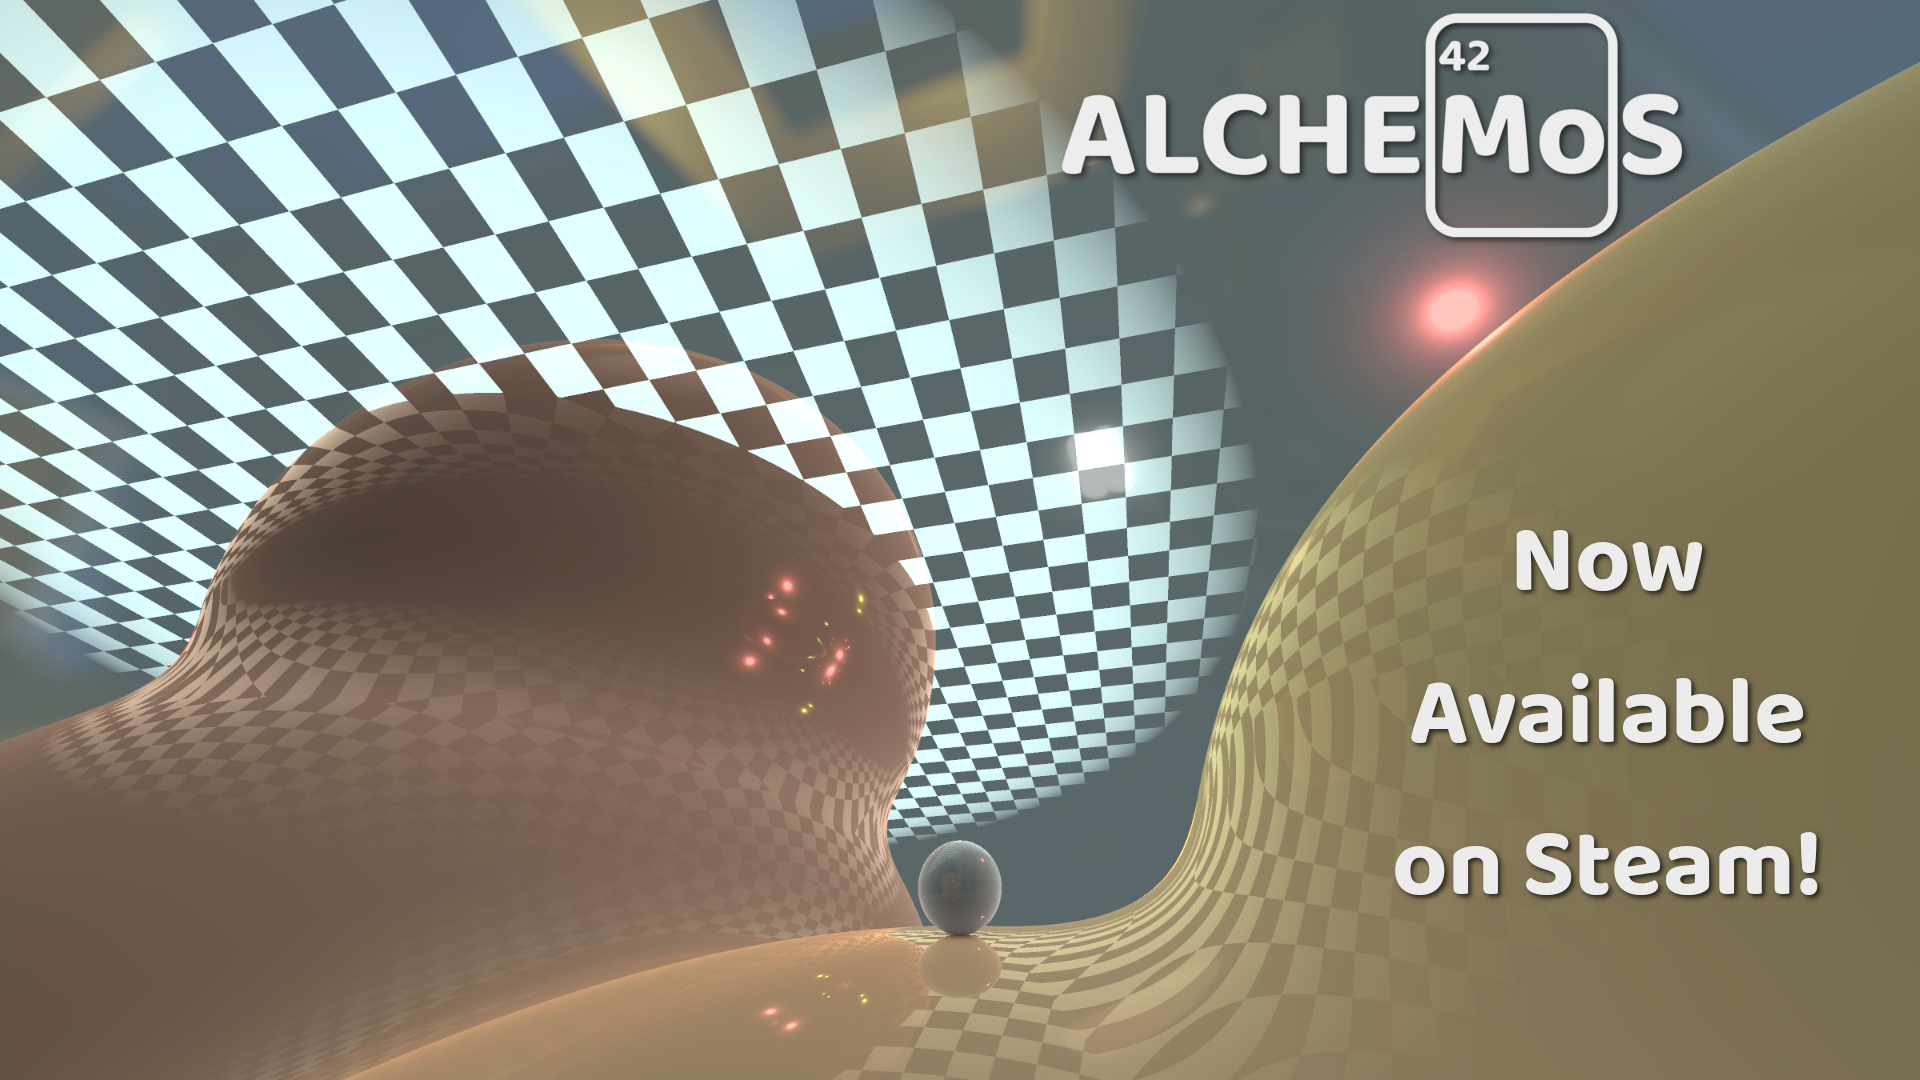 AlCHeMoS is NOW AVAILABLE ON STEAM!